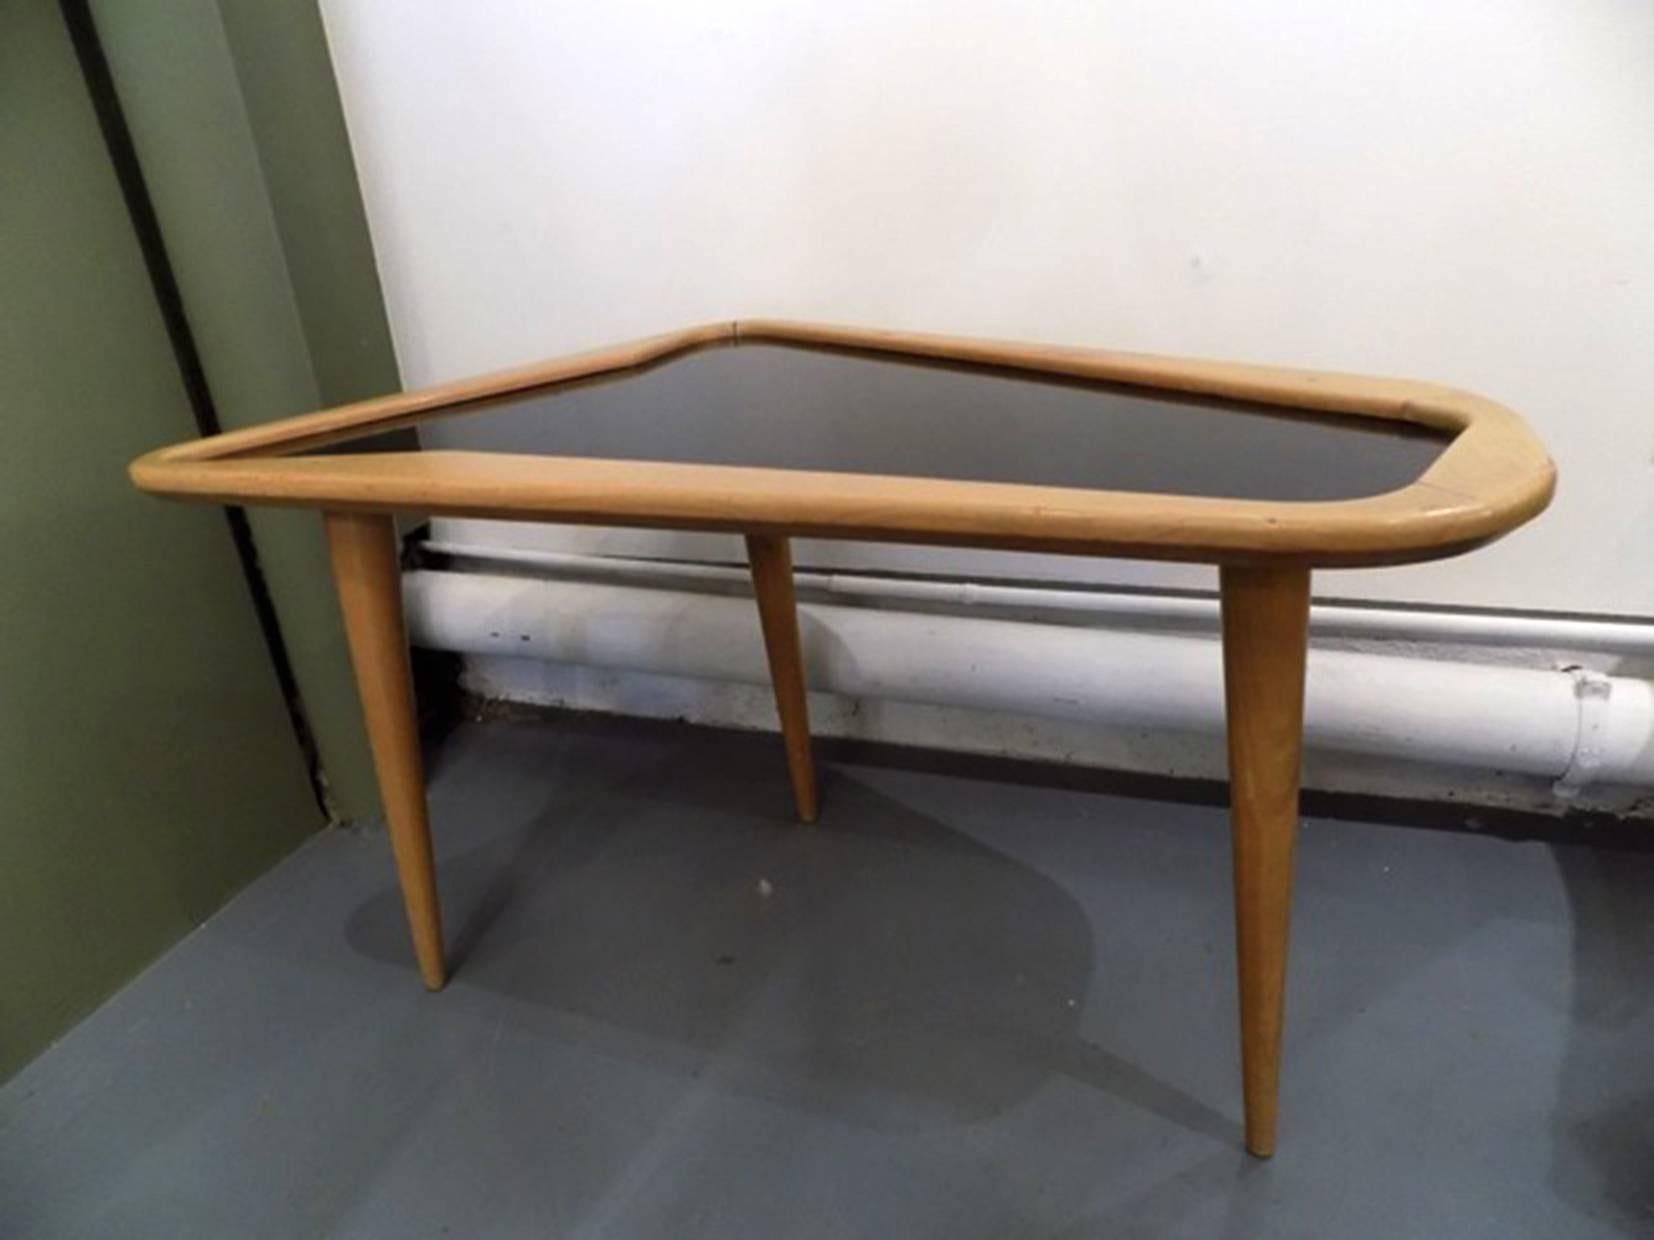 Charles Ramos free-form coffee table, circa 1950.
Those free-form coffee table was designed in France in 1956 by Charles Ramos. It is made from oak and features a laminated top. 
It is in excellent vintage condition.

Available single as